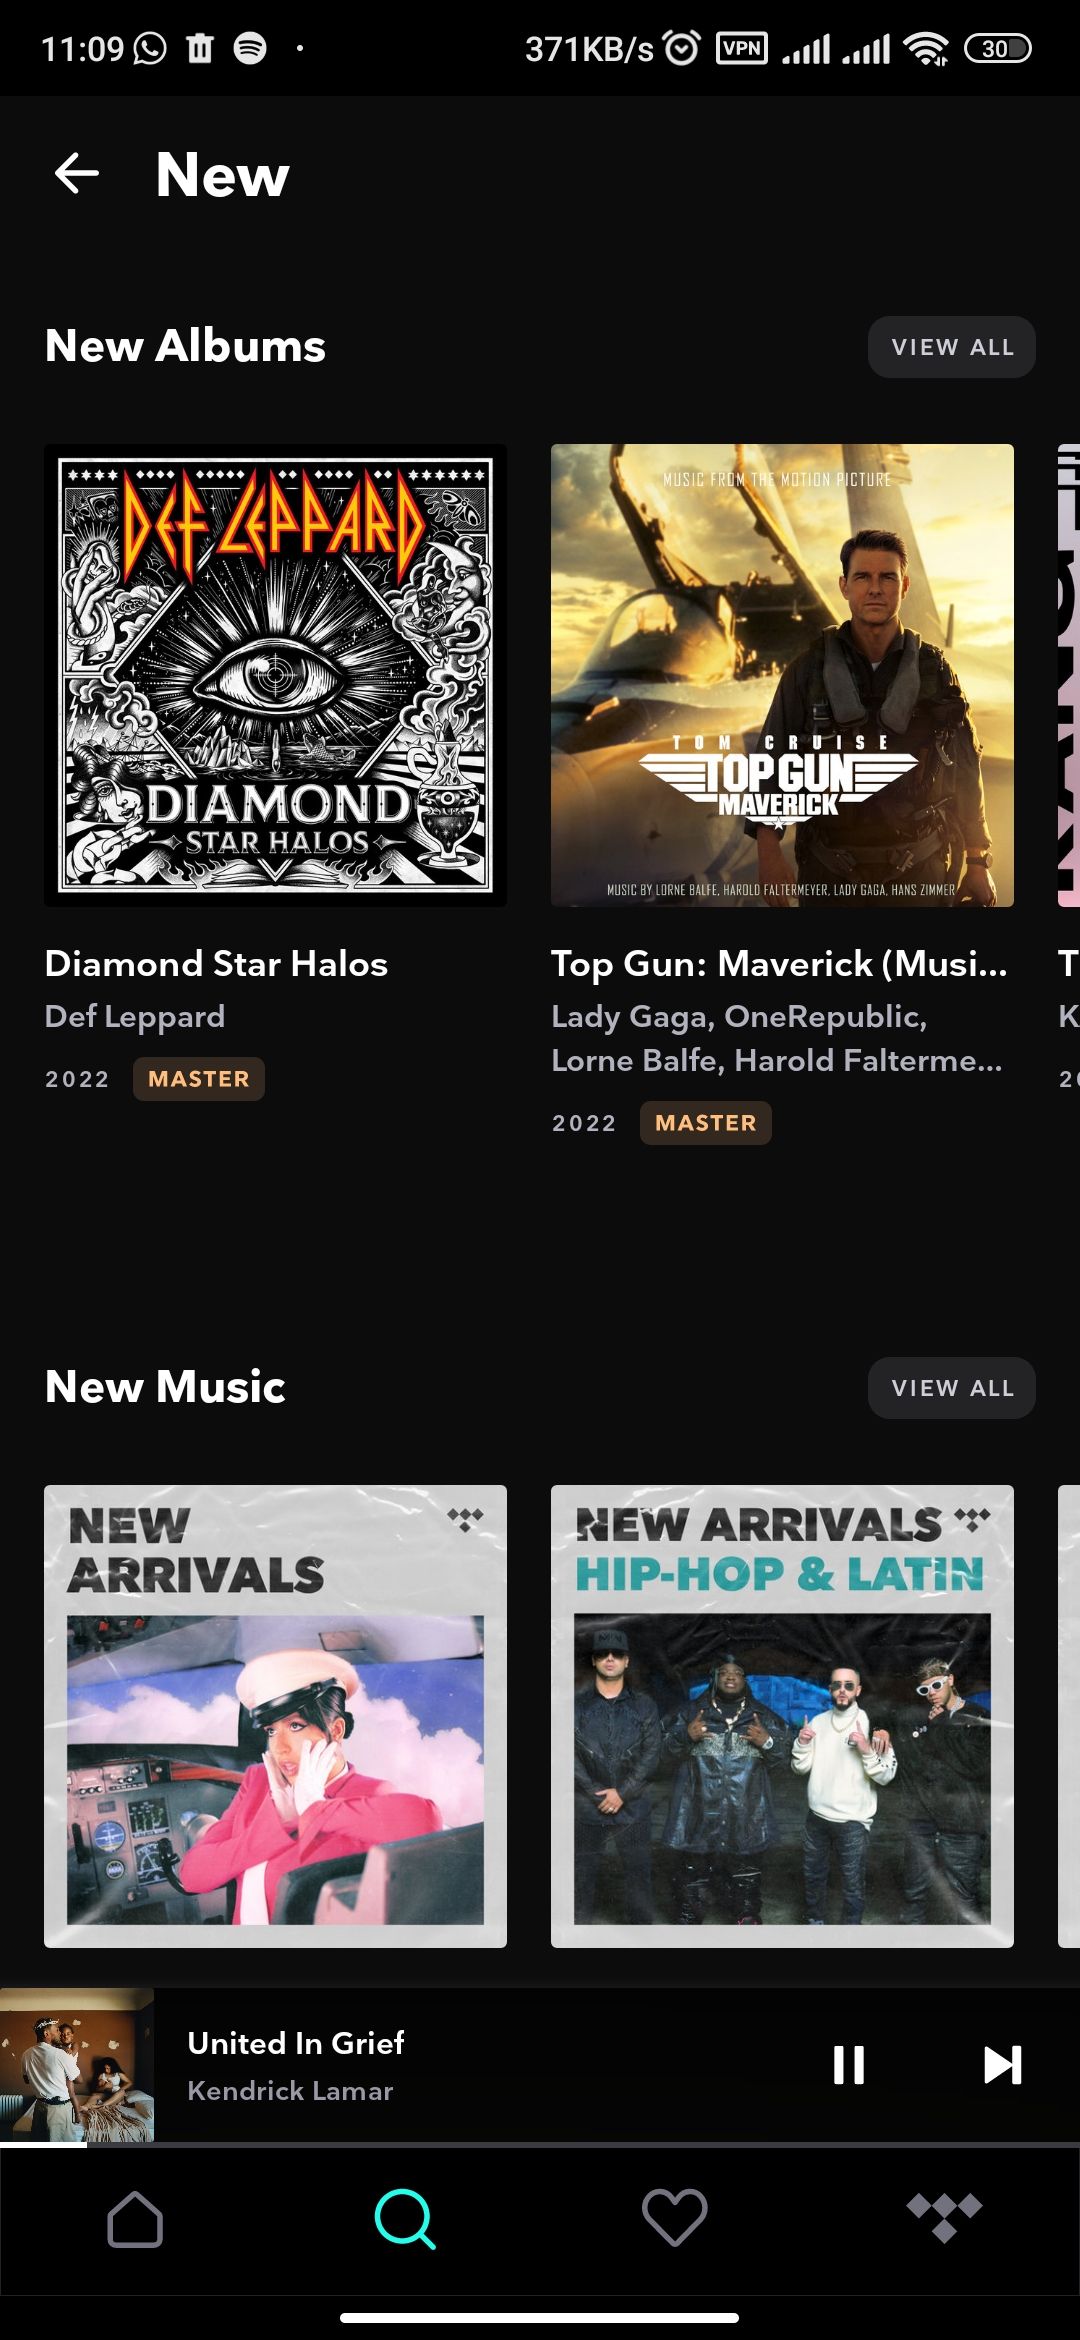 TIDAL app showing the latest albums and tracks